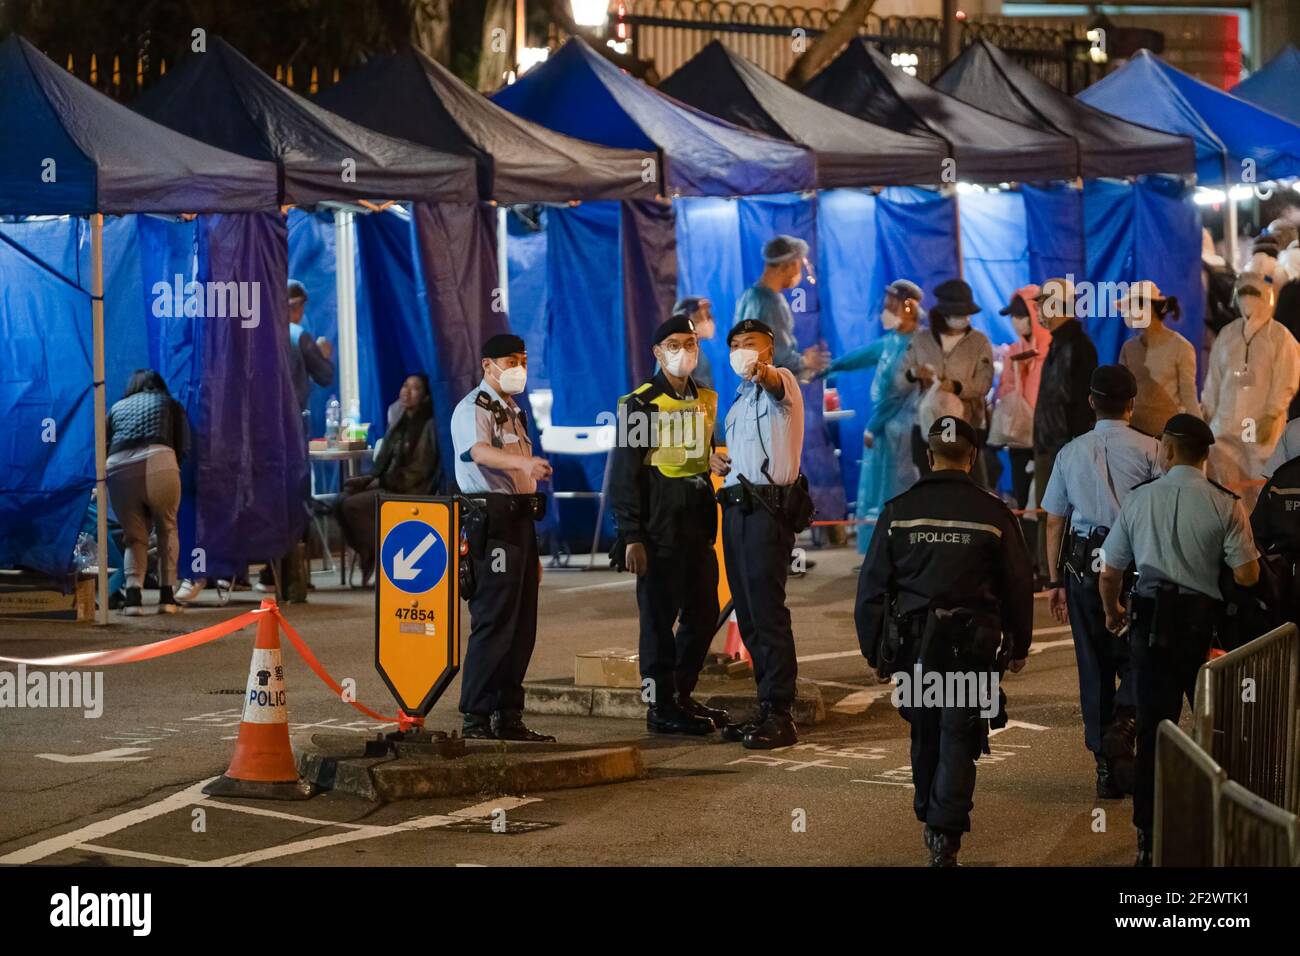 Hong Kong, China. 13th Mar, 2021. Police officers stand guard in the lockdown zone.The Hong Kong government has decided to lock down a section of Robinson Road in the Mid-Level district of Hong Kong in a bid to control the Covid-19 coronavirus from spreading. Residents in the locked down zone have to take a compulsory Covid-19 test and they will only be allowed to leave the zone after their test result return negative. (Photo by Geovien So/SOPA Images/Sipa USA) Credit: Sipa USA/Alamy Live News Stock Photo